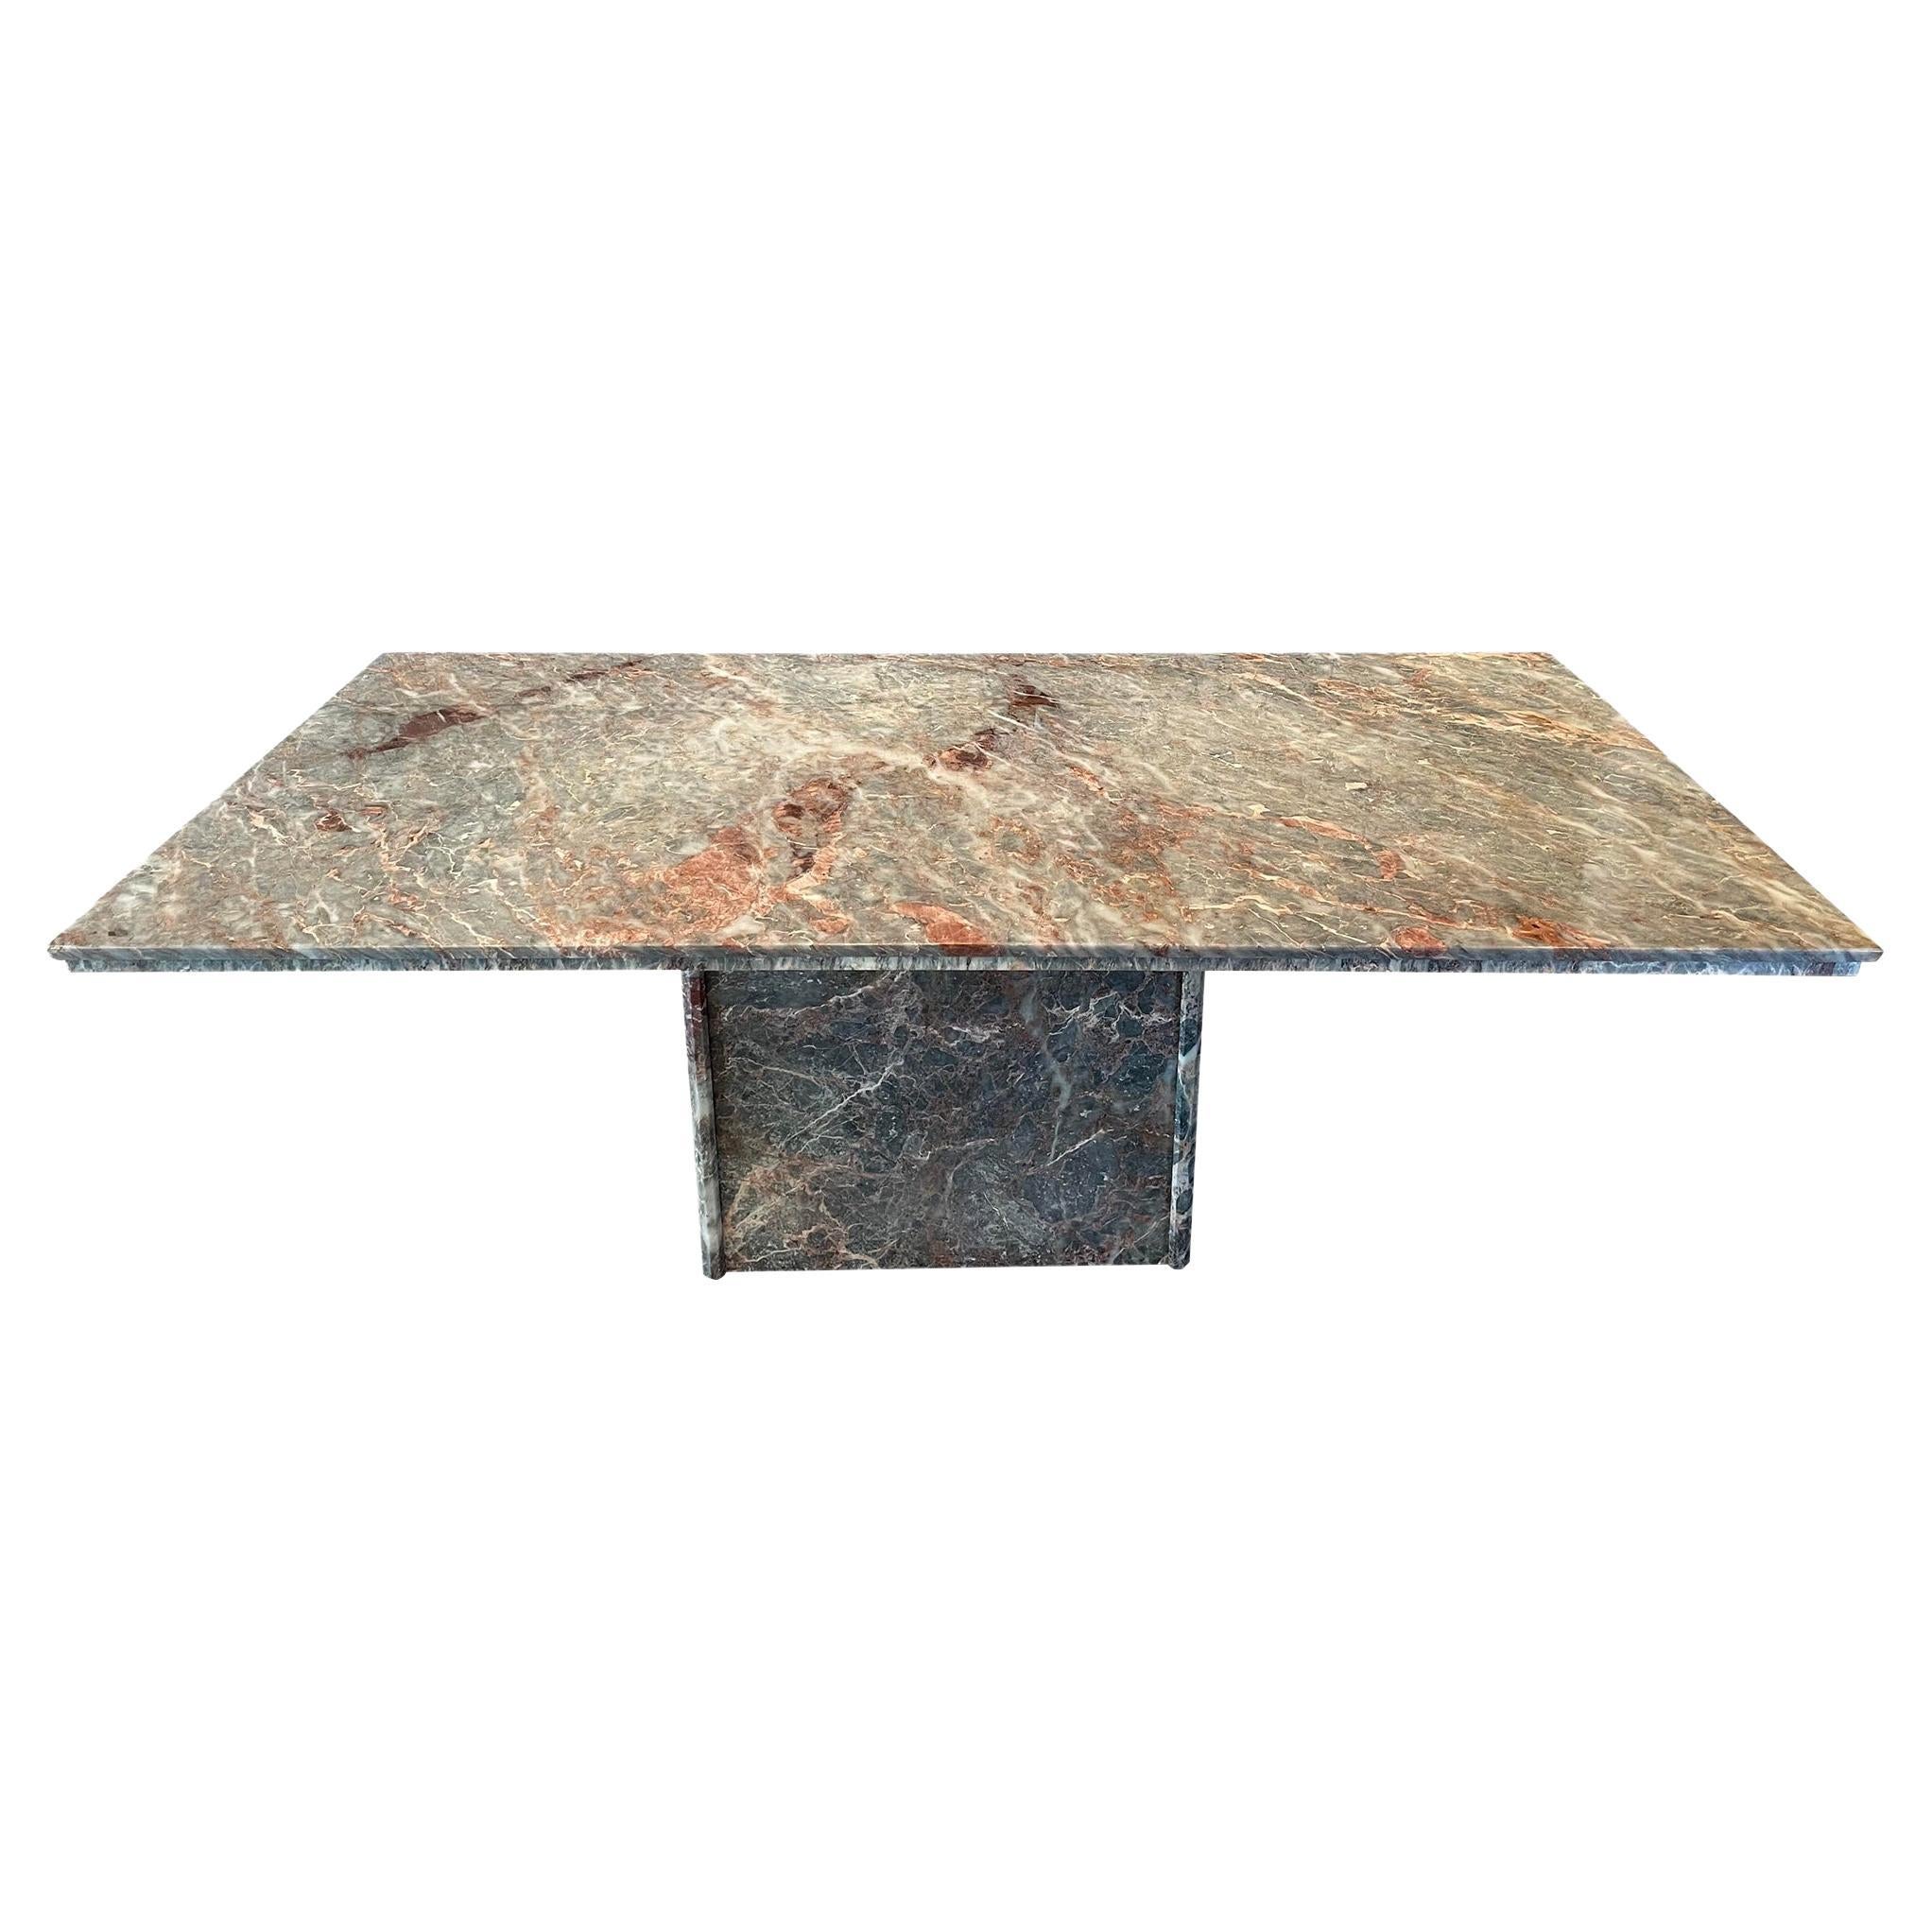 1980s Italian Fior Di Pesco Marble Postmodern Vintage Dining Table For Sale